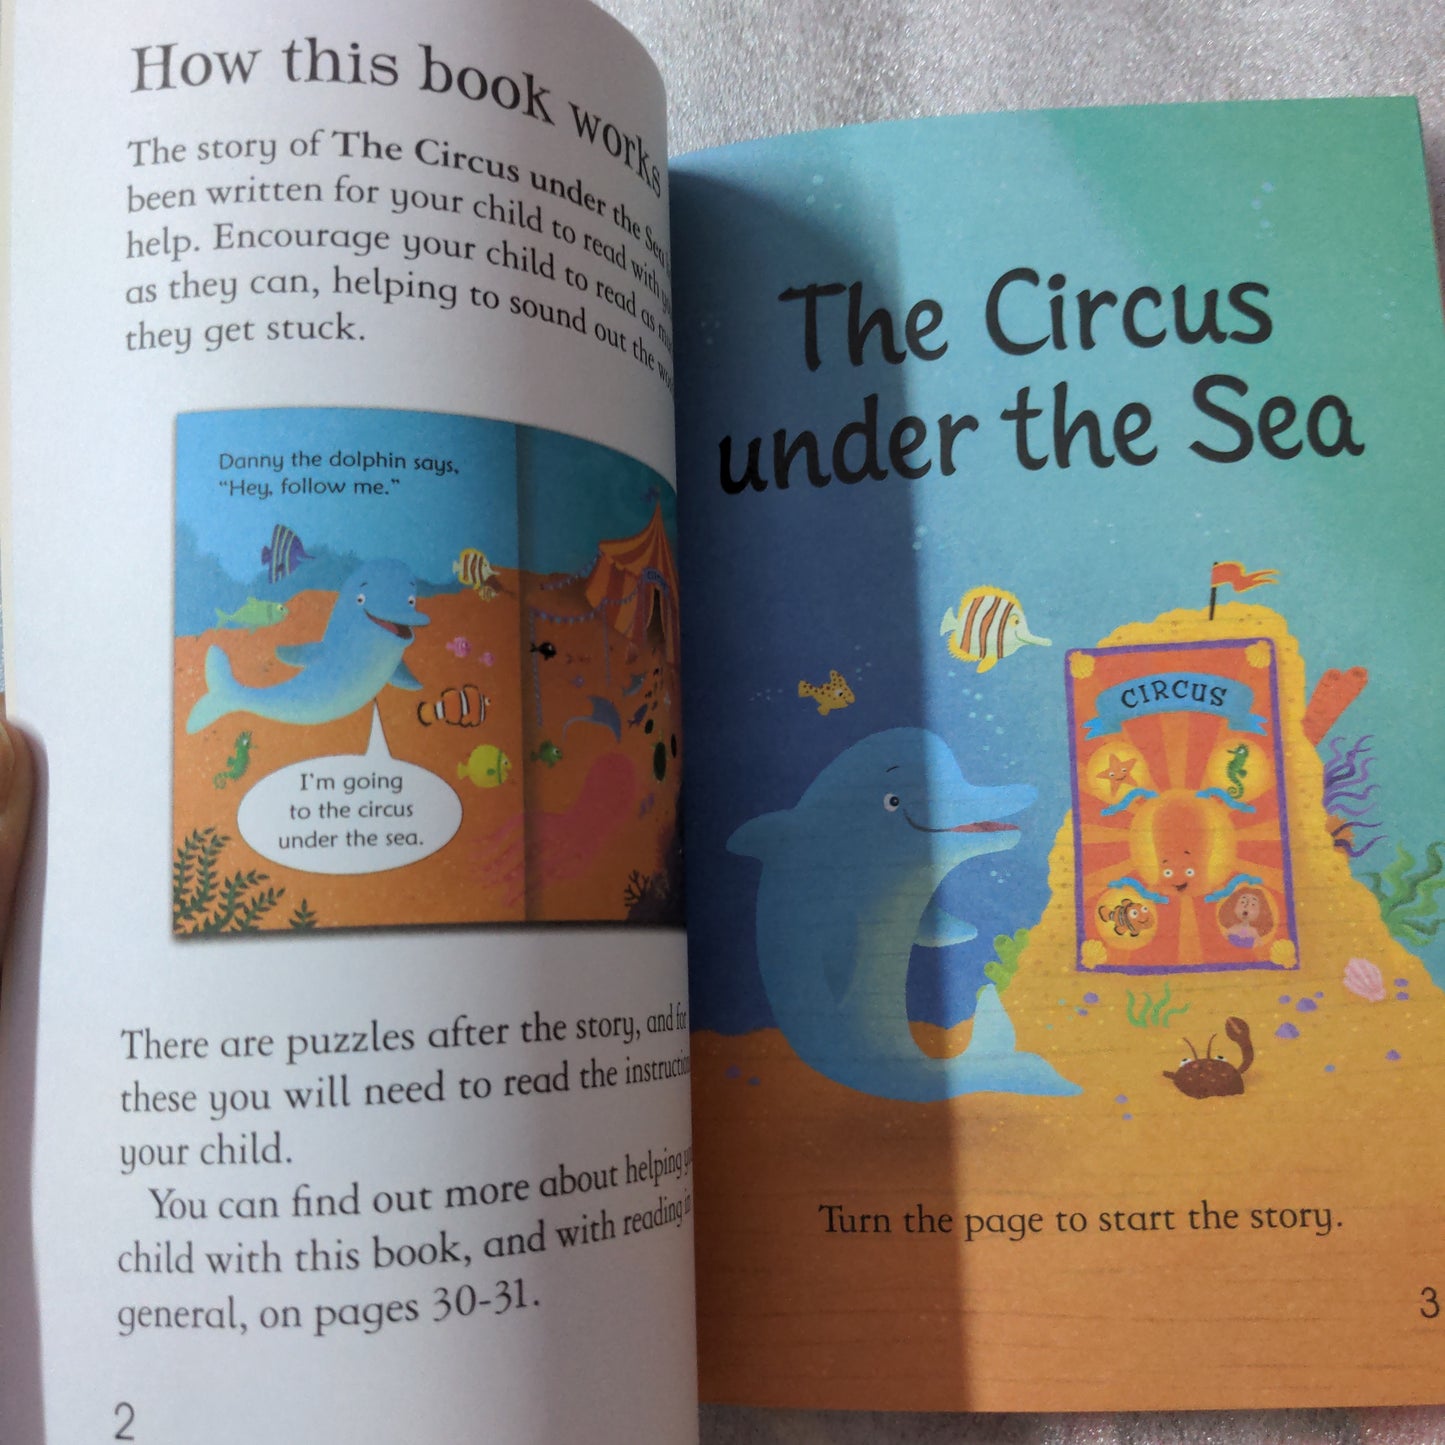 The Circus under the Sea